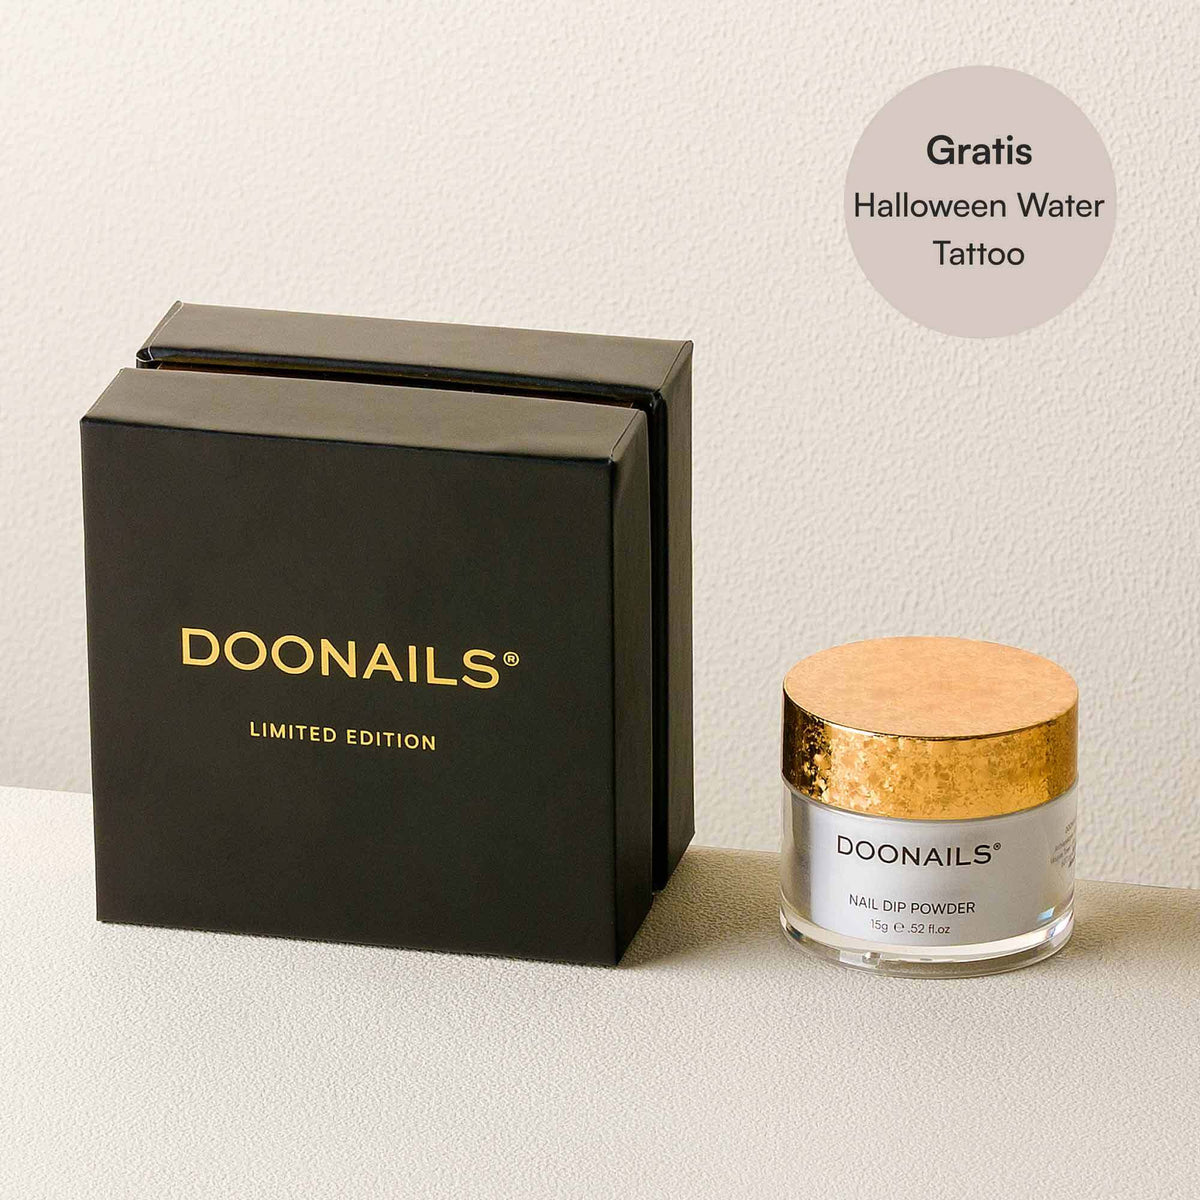 5. Doonails Limited Edition